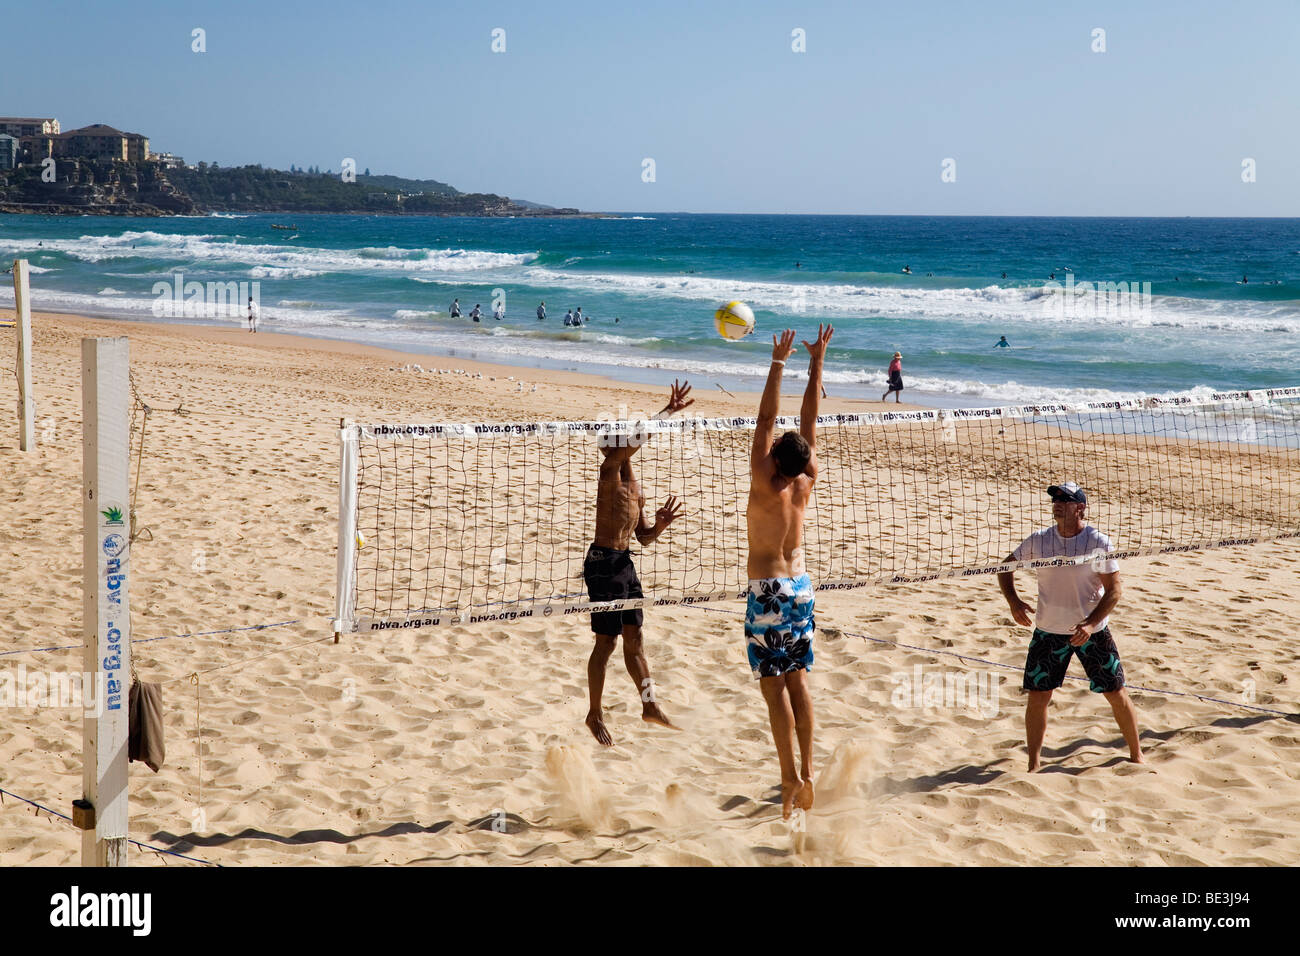 Beach volleyballers on the sands of Manly beach. Sydney, New South Wales, AUSTRALIA Stock Photo